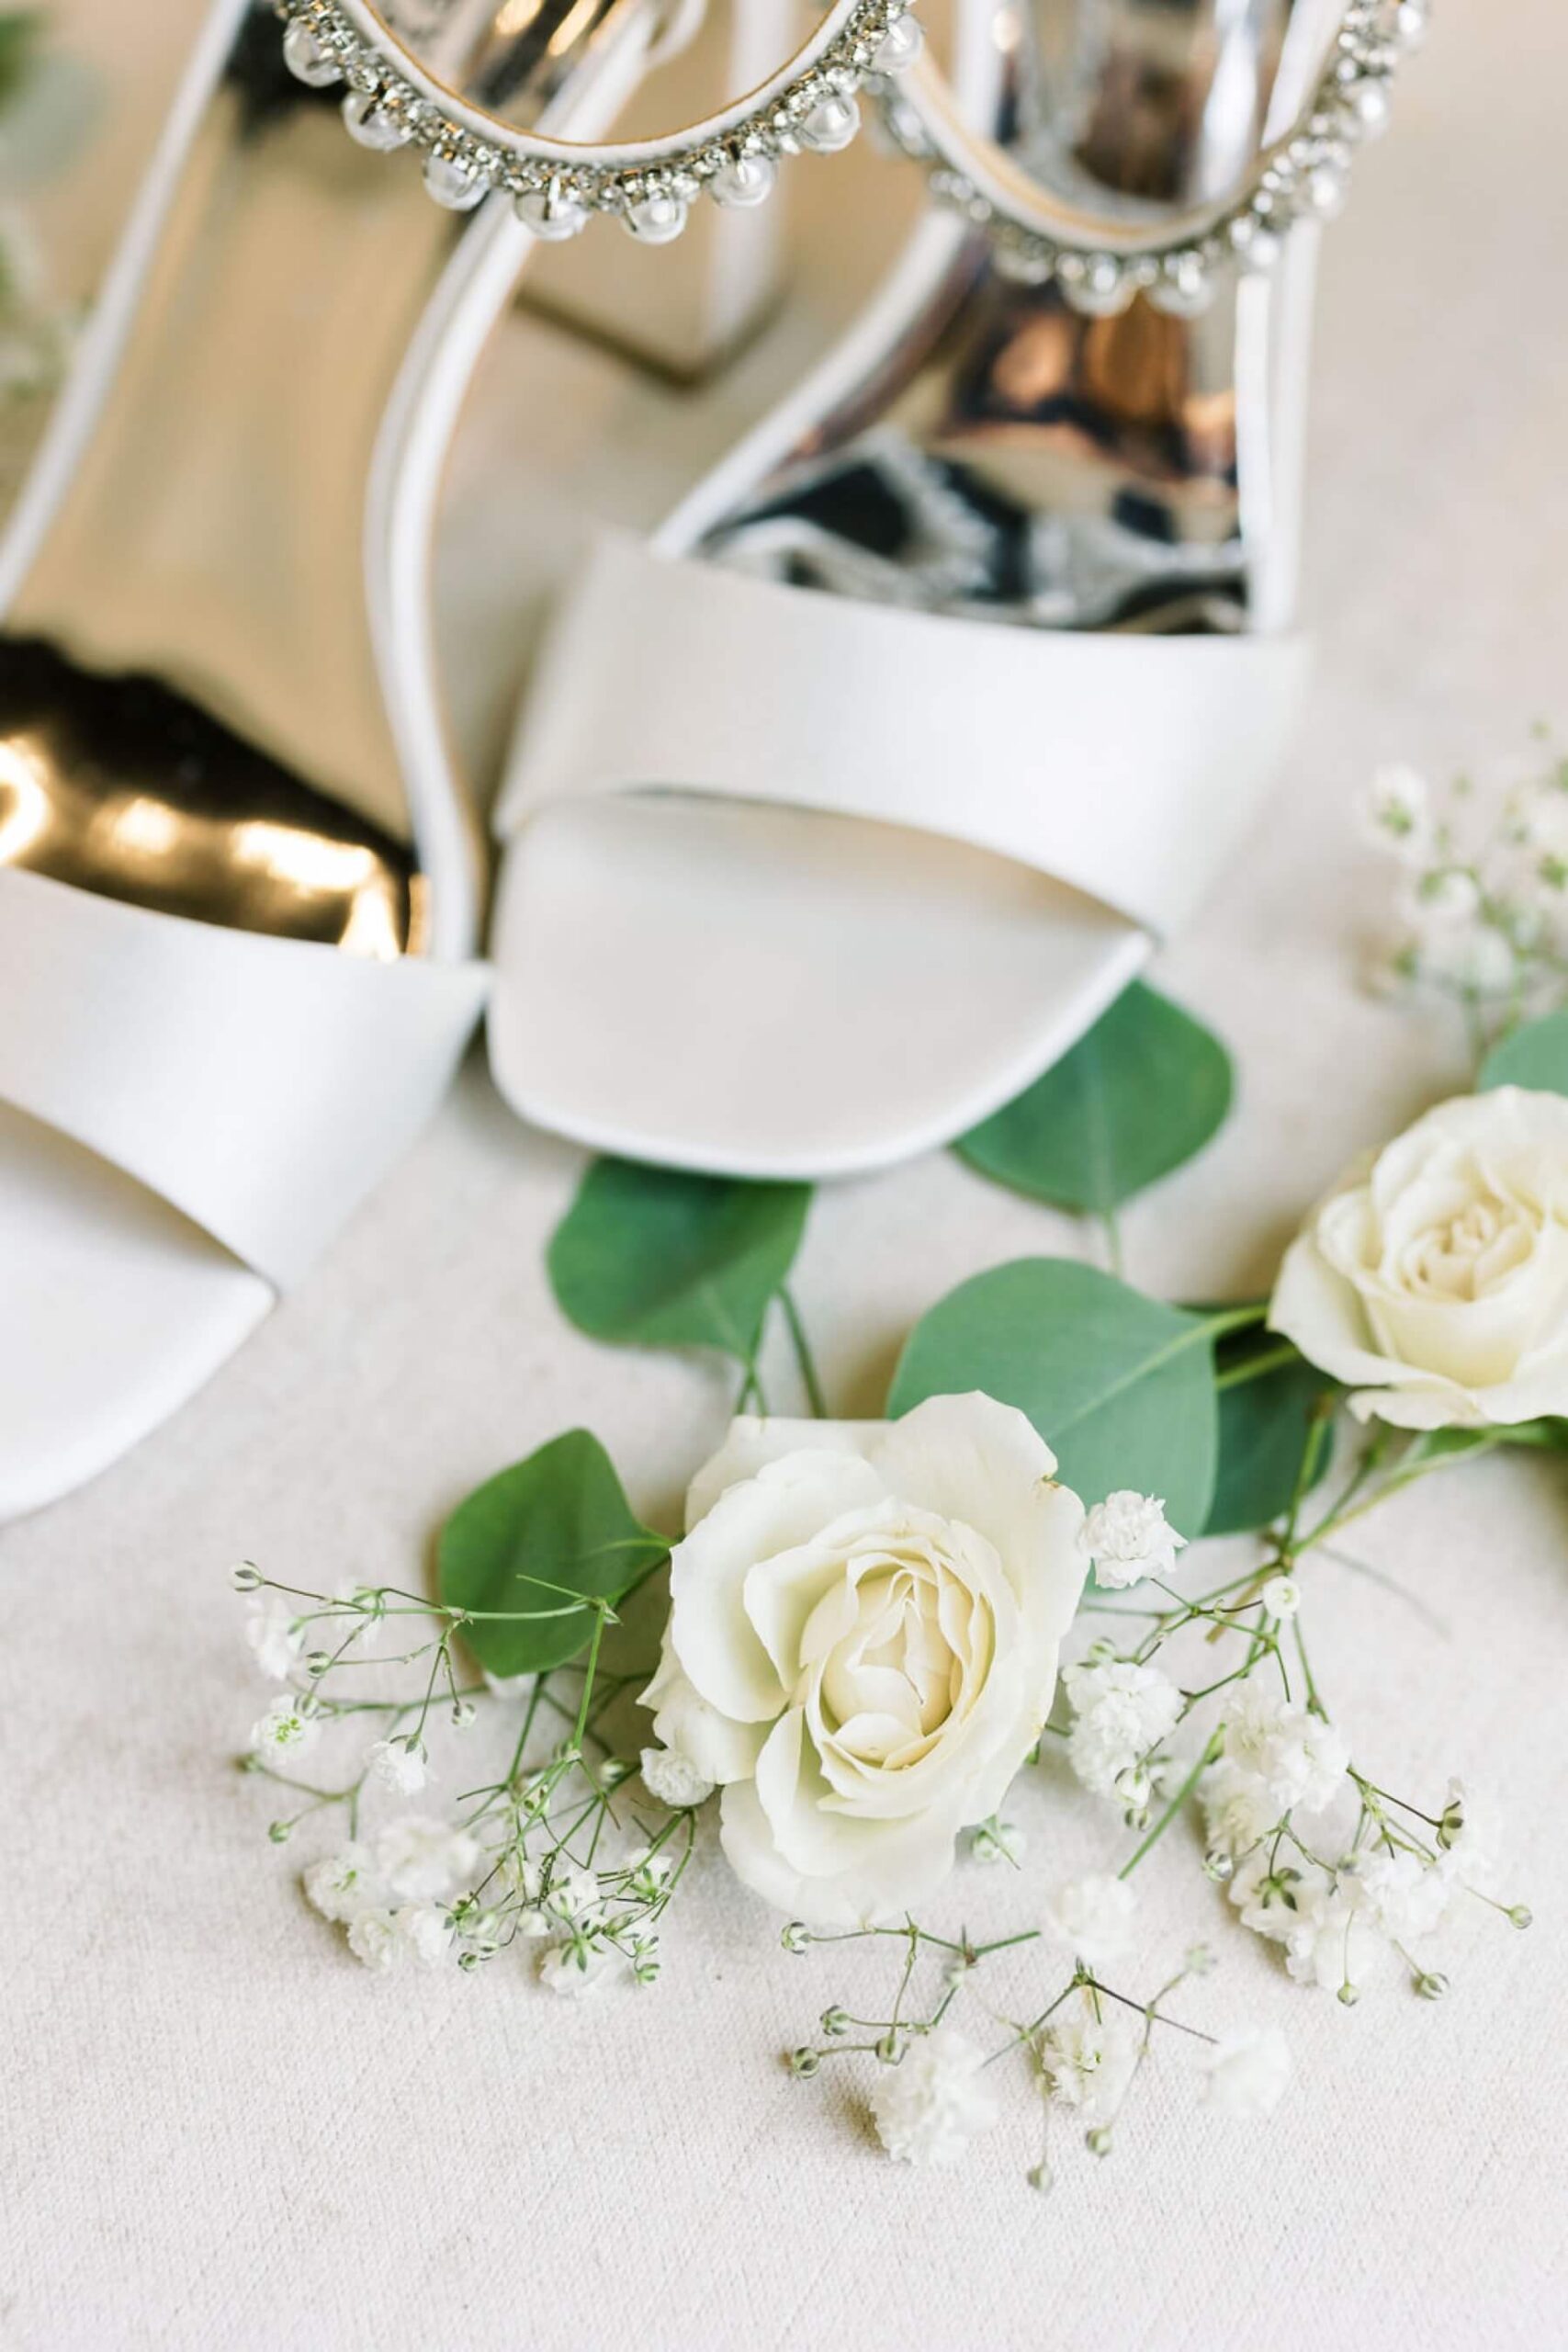 White Badly Mischka bridal shoes with white rose and baby's breath